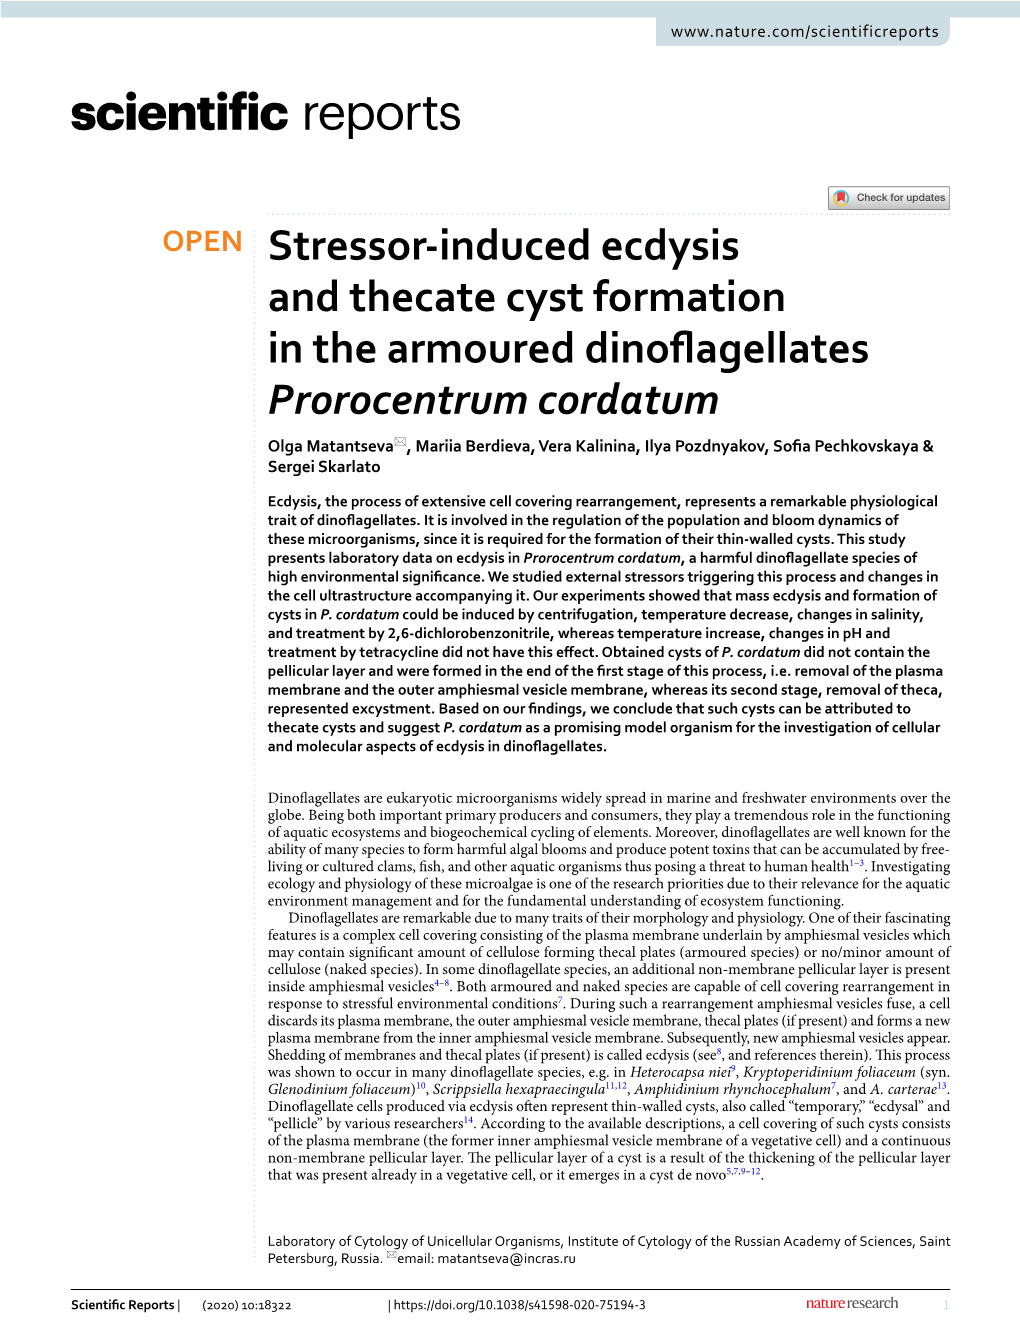 Stressor-Induced Ecdysis and Thecate Cyst Formation in the Armoured